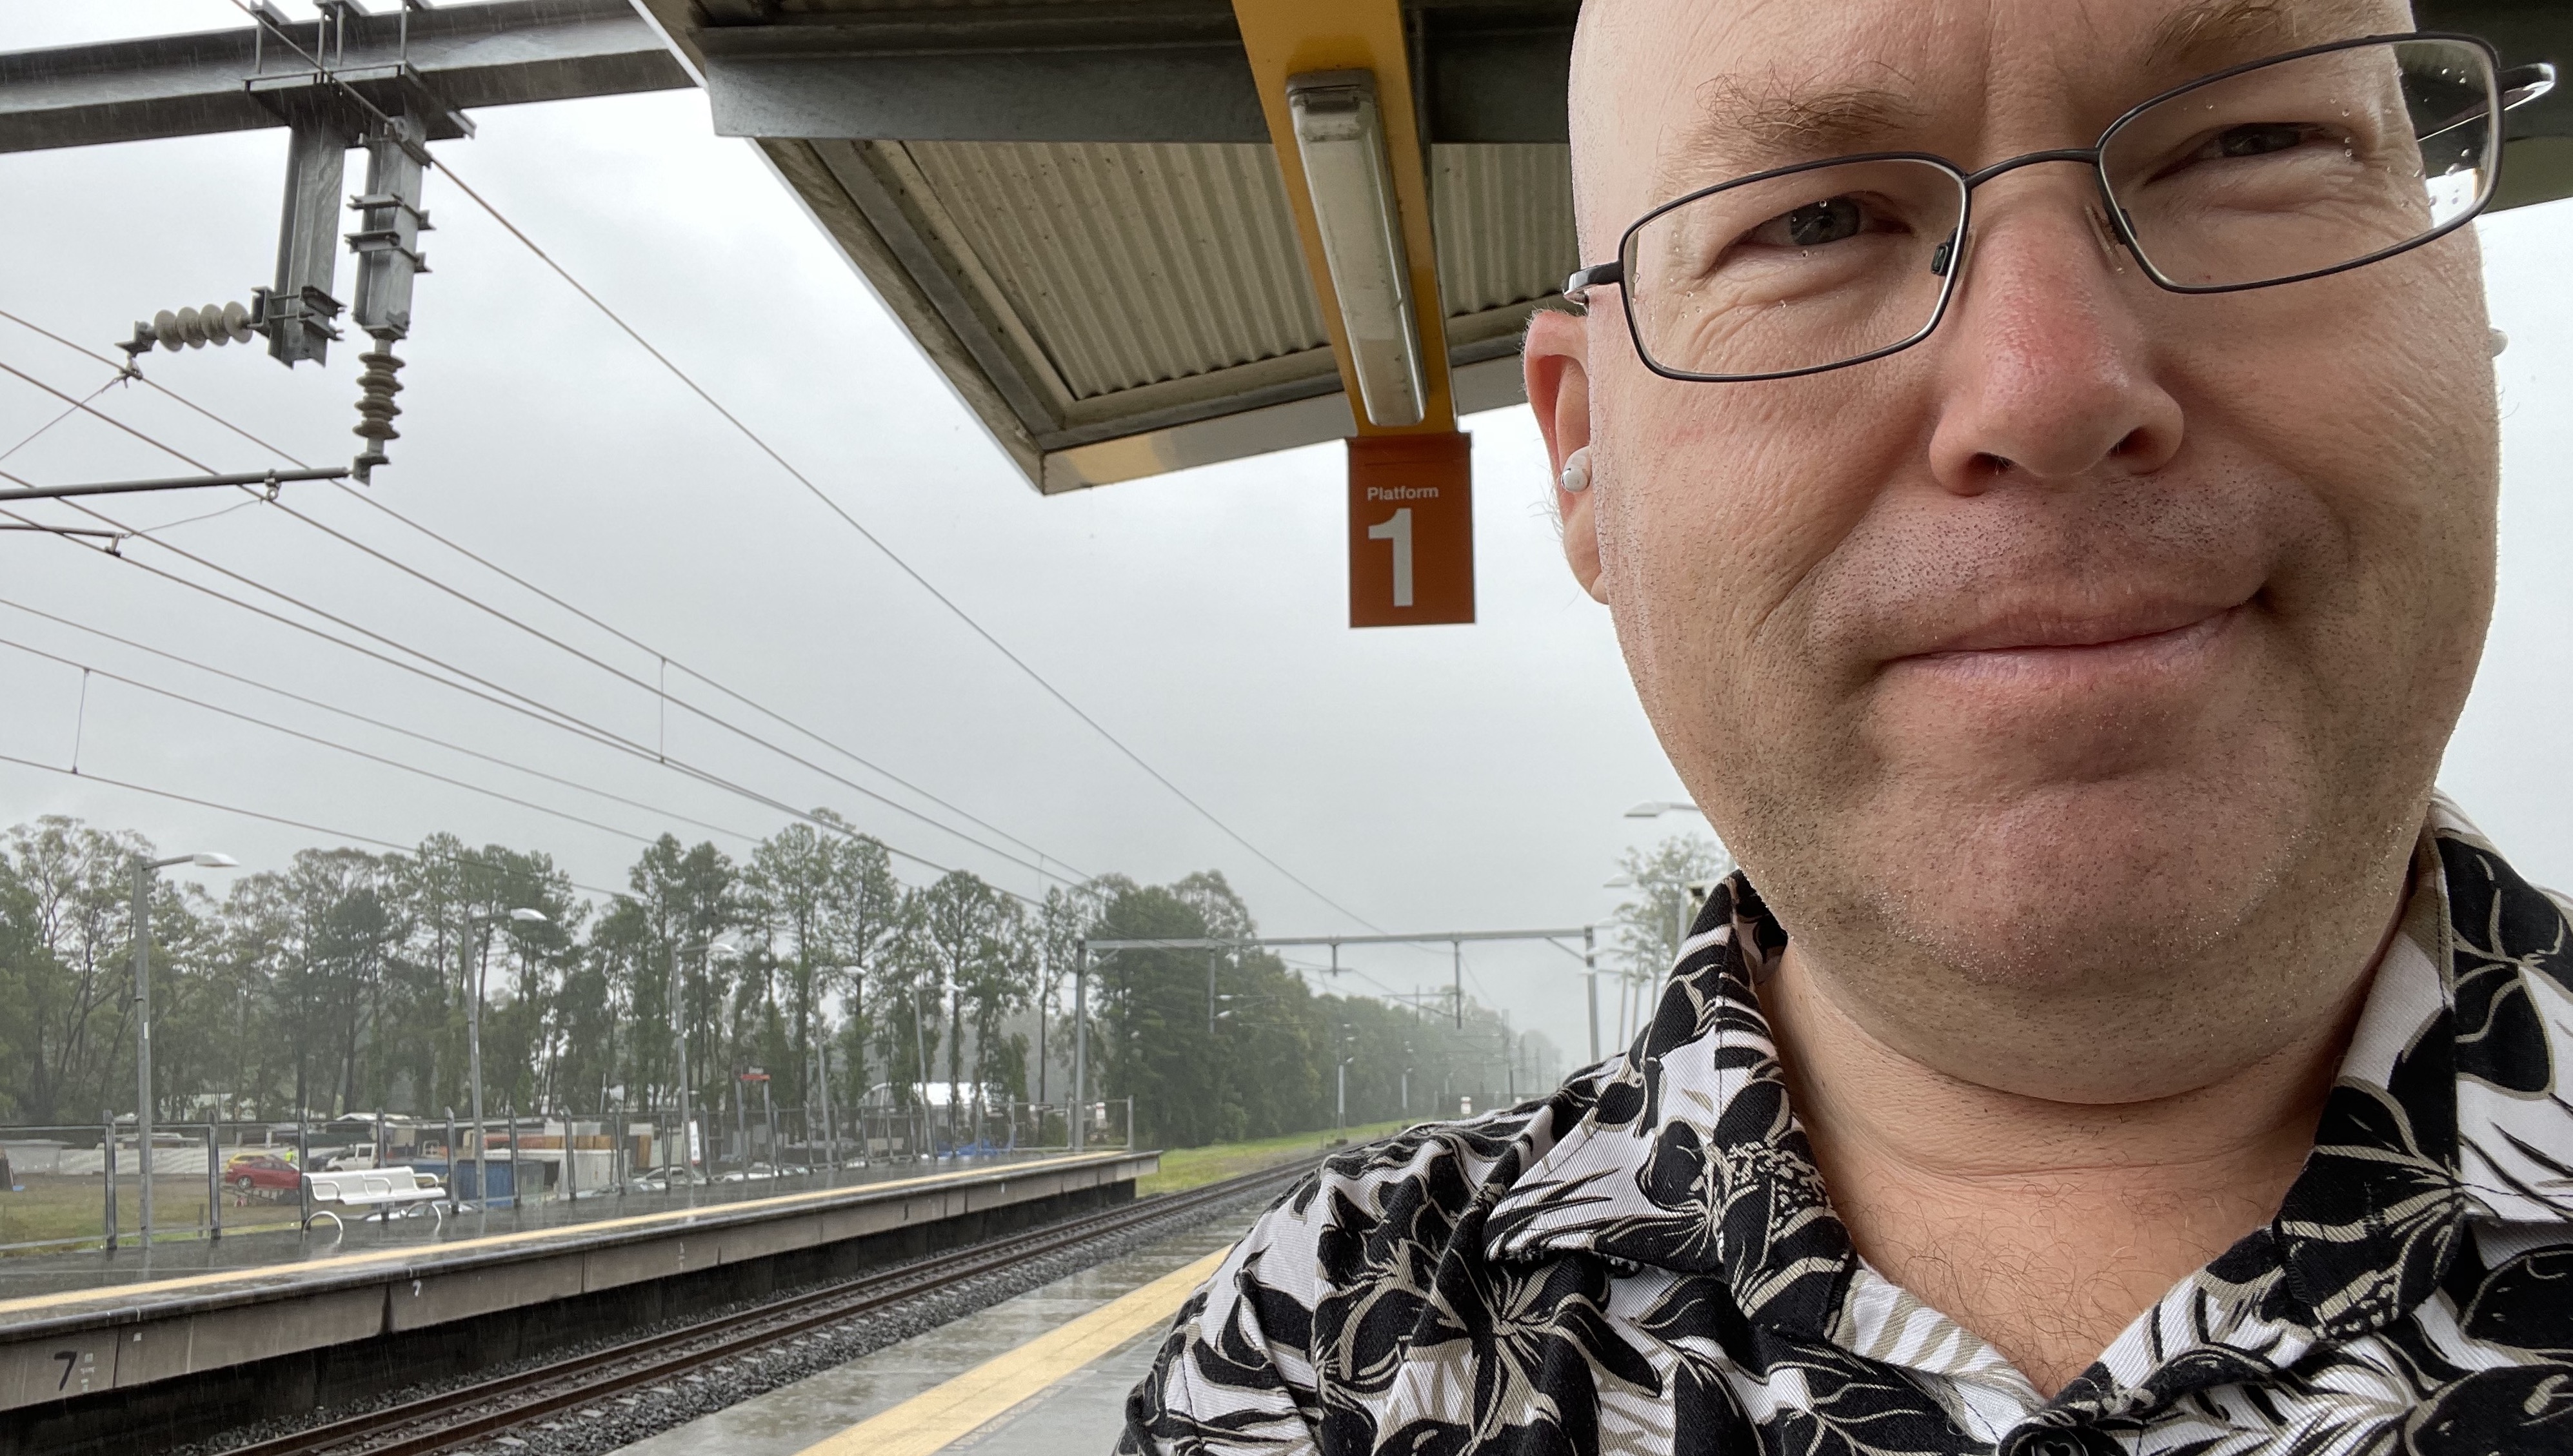 Waiting for the Train in the rain